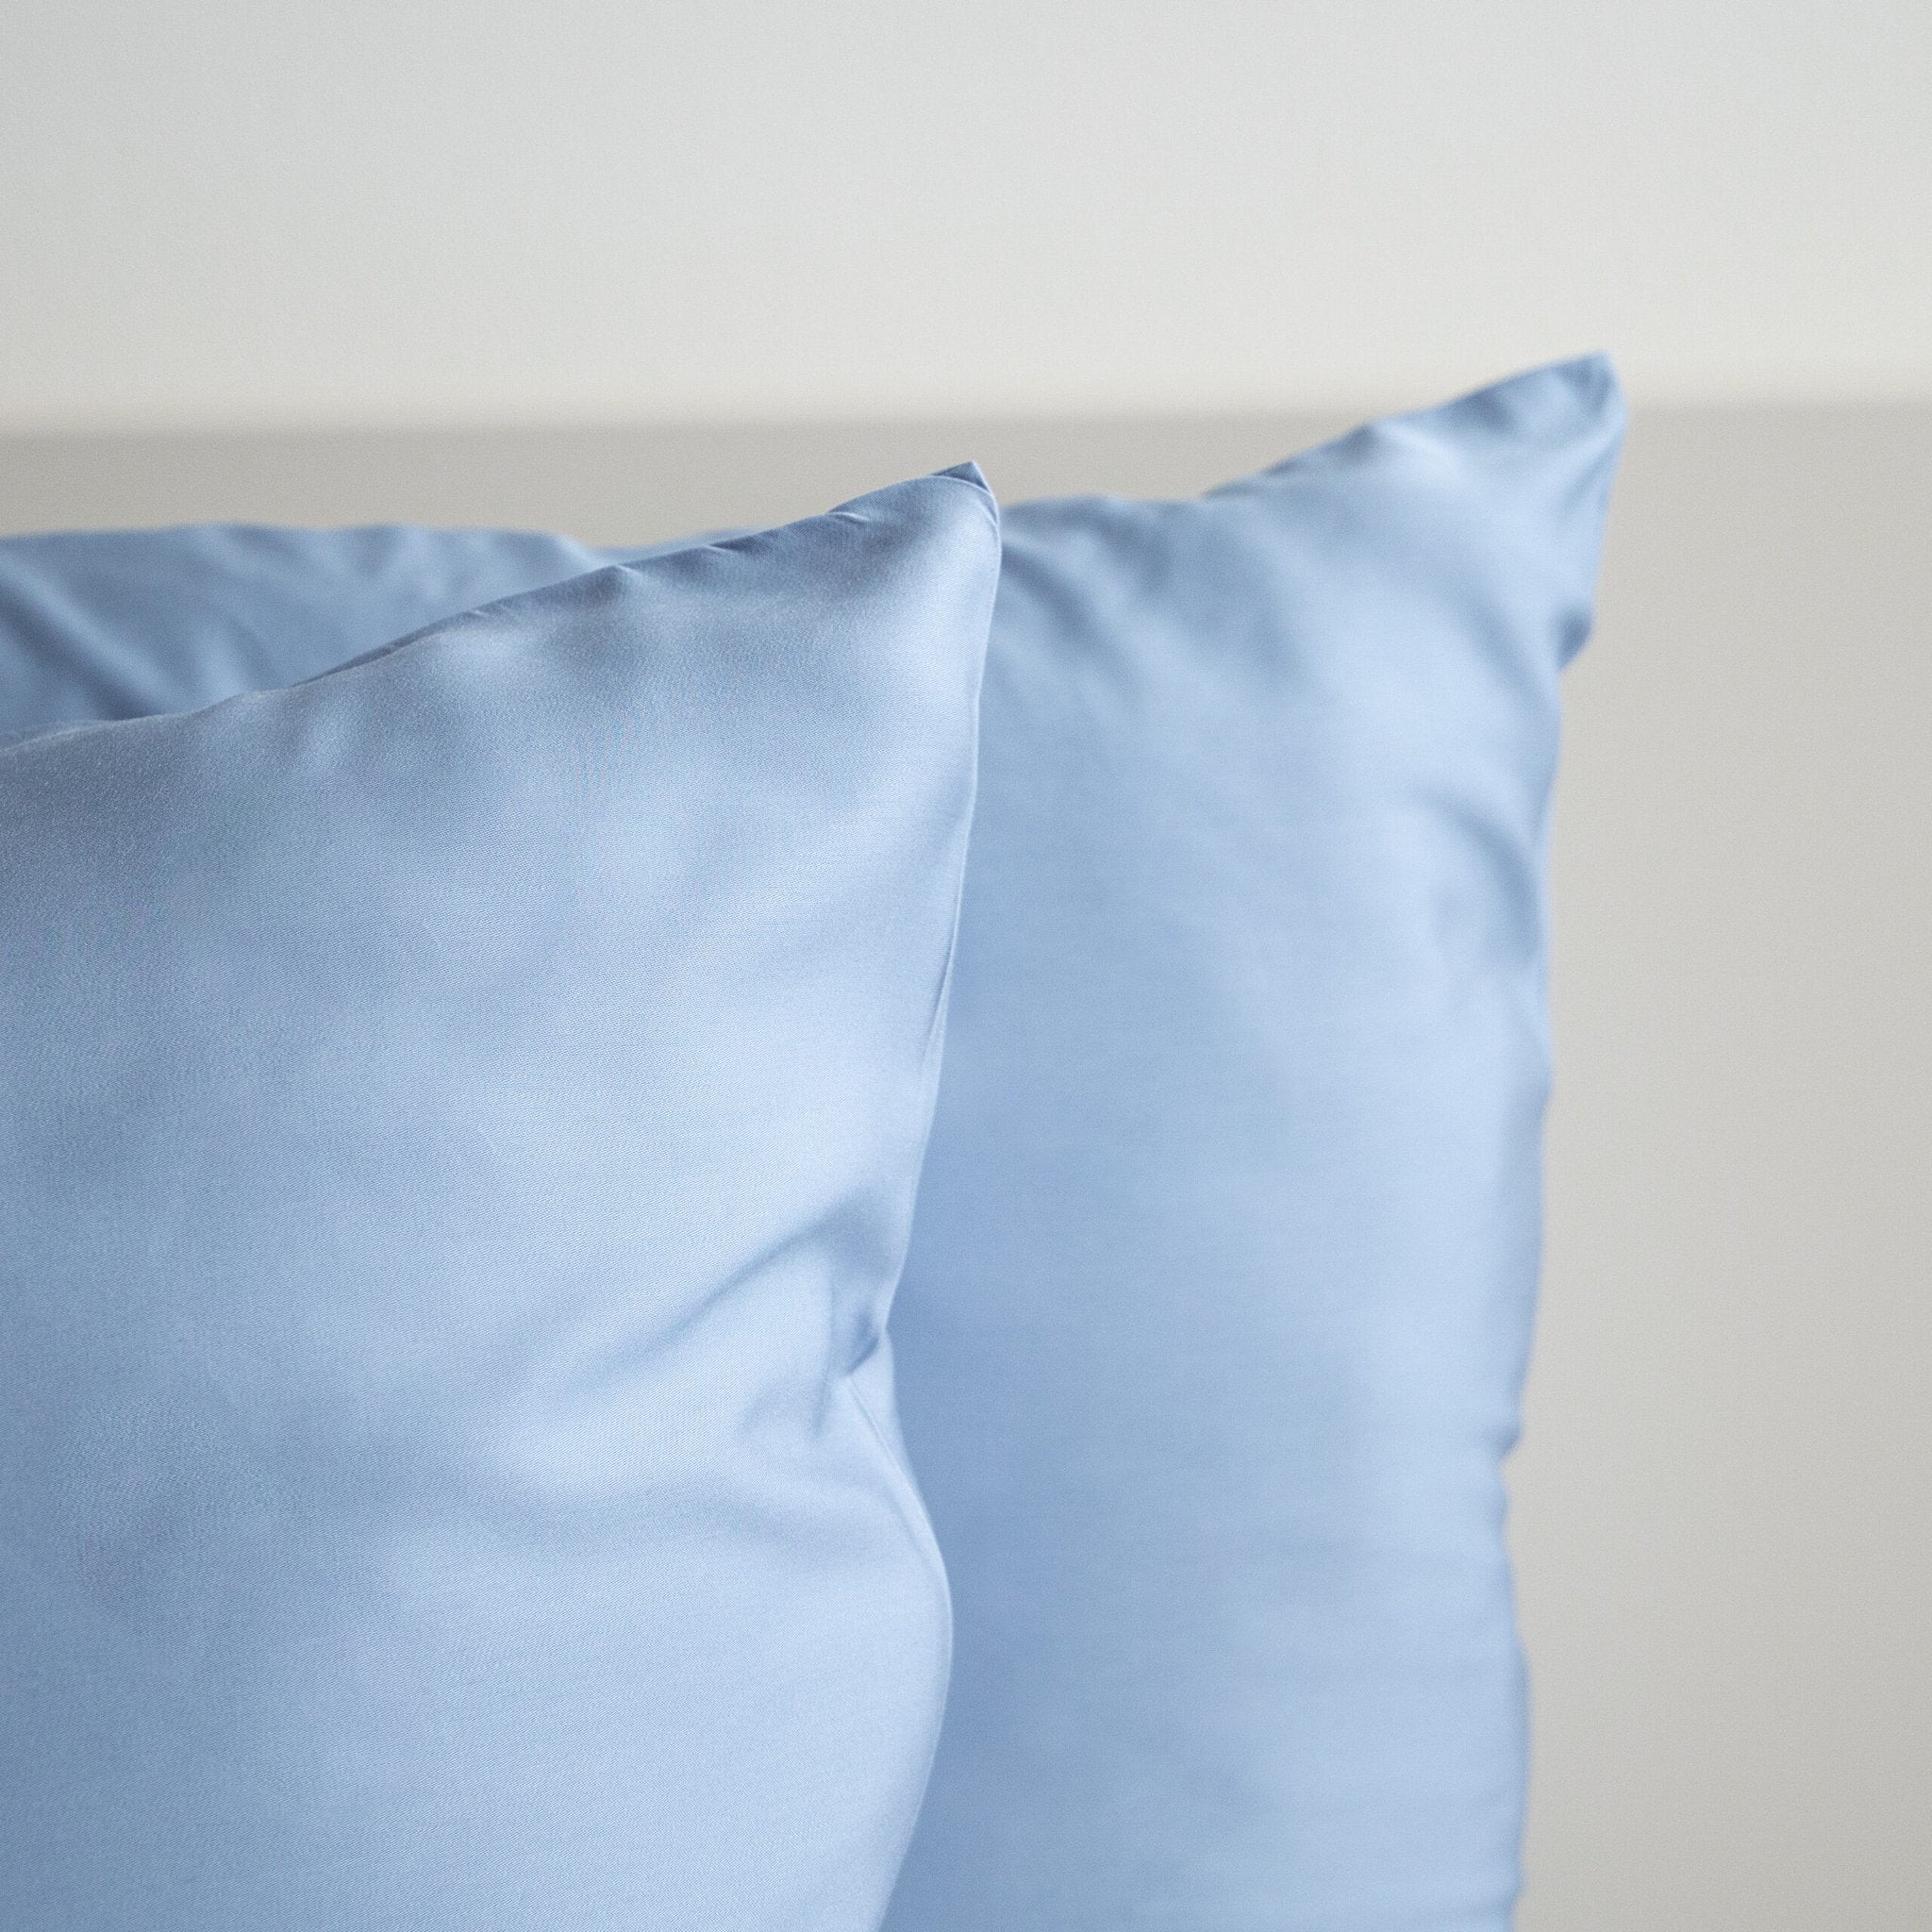 bamboo stories - bamboo pillowcases blue (2 pieces)